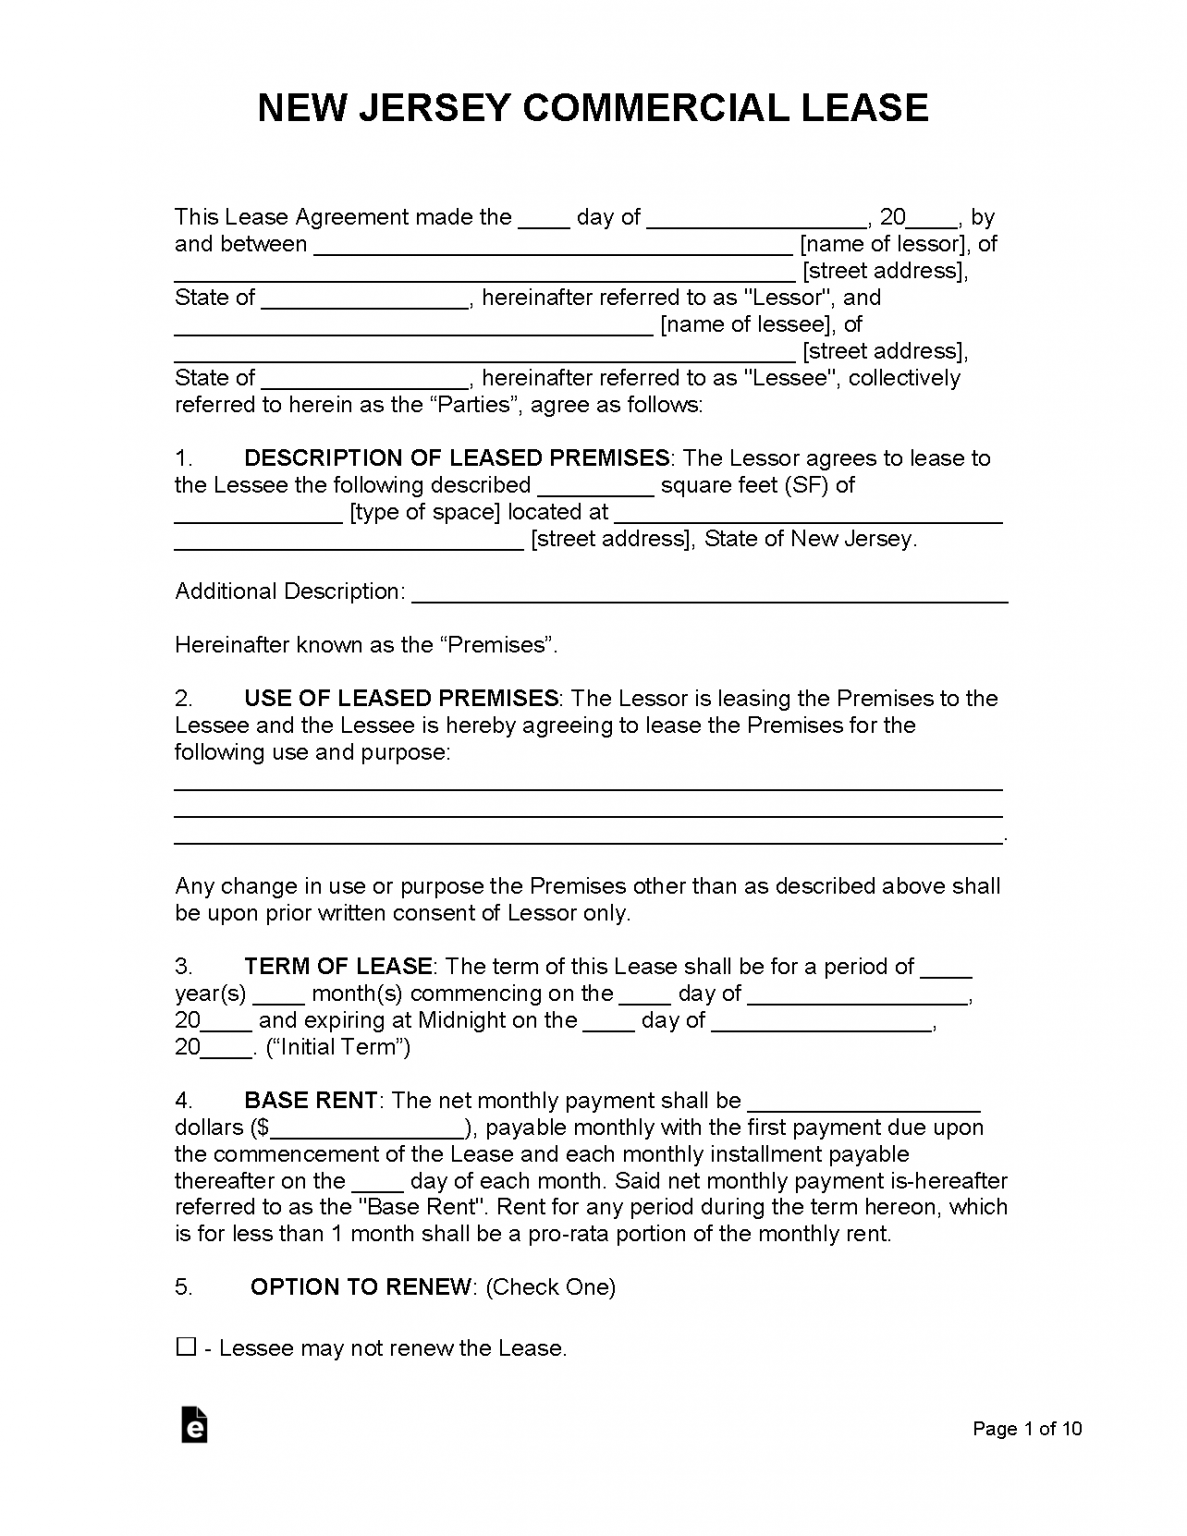 new-jersey-lease-agreement-templates-6